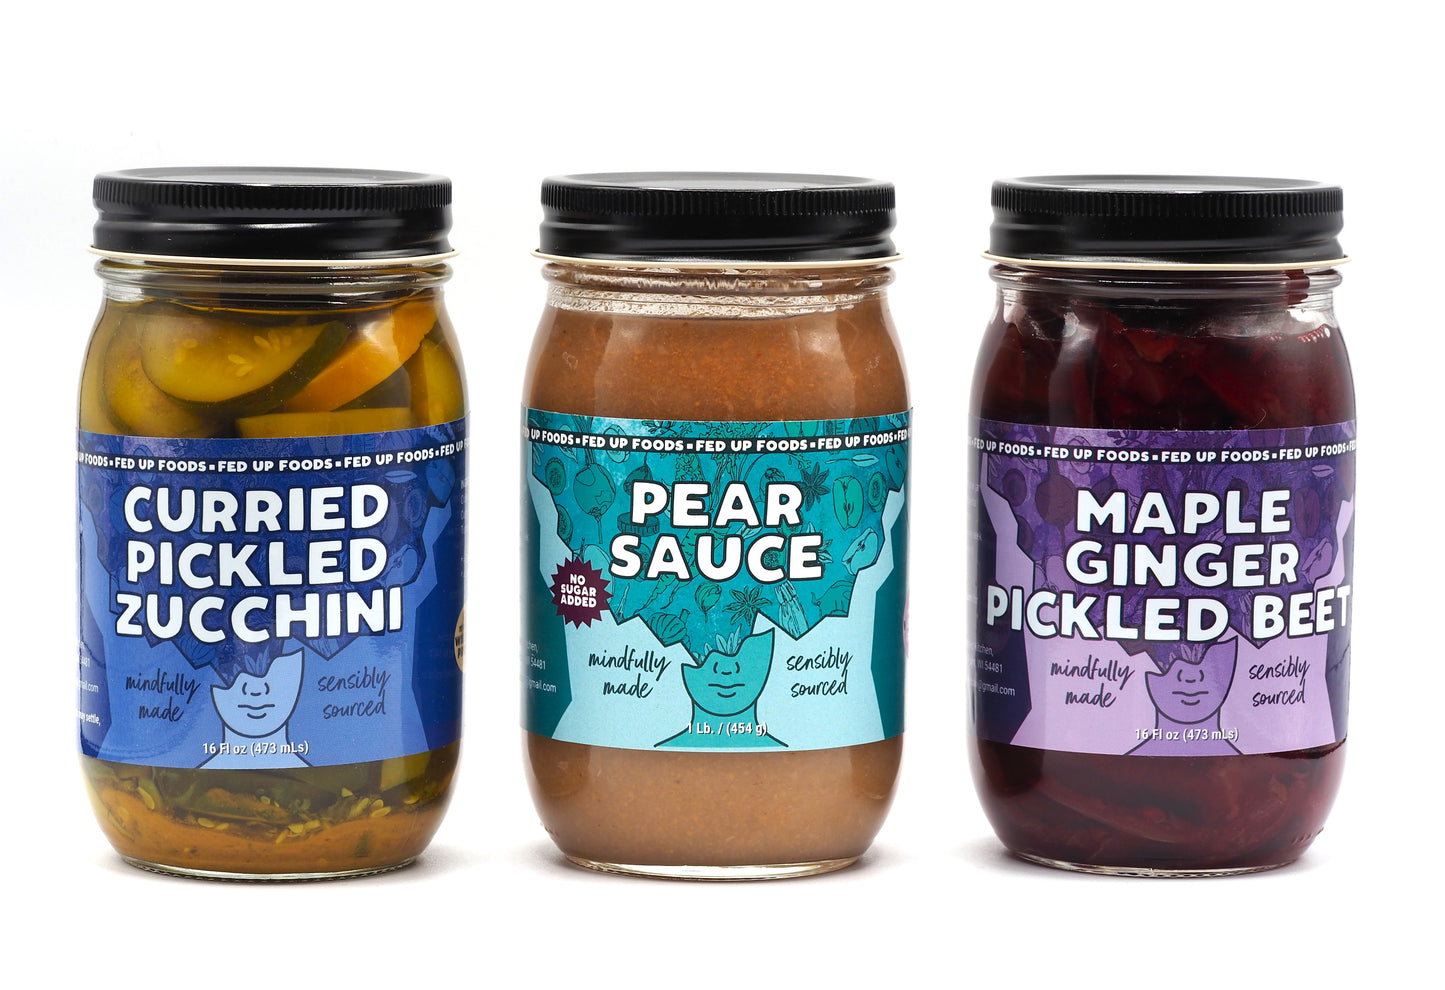 Fed Up Foods curried pickled zucchini, pear sauce and maple ginger pickled beet in a 3 pack variety pack